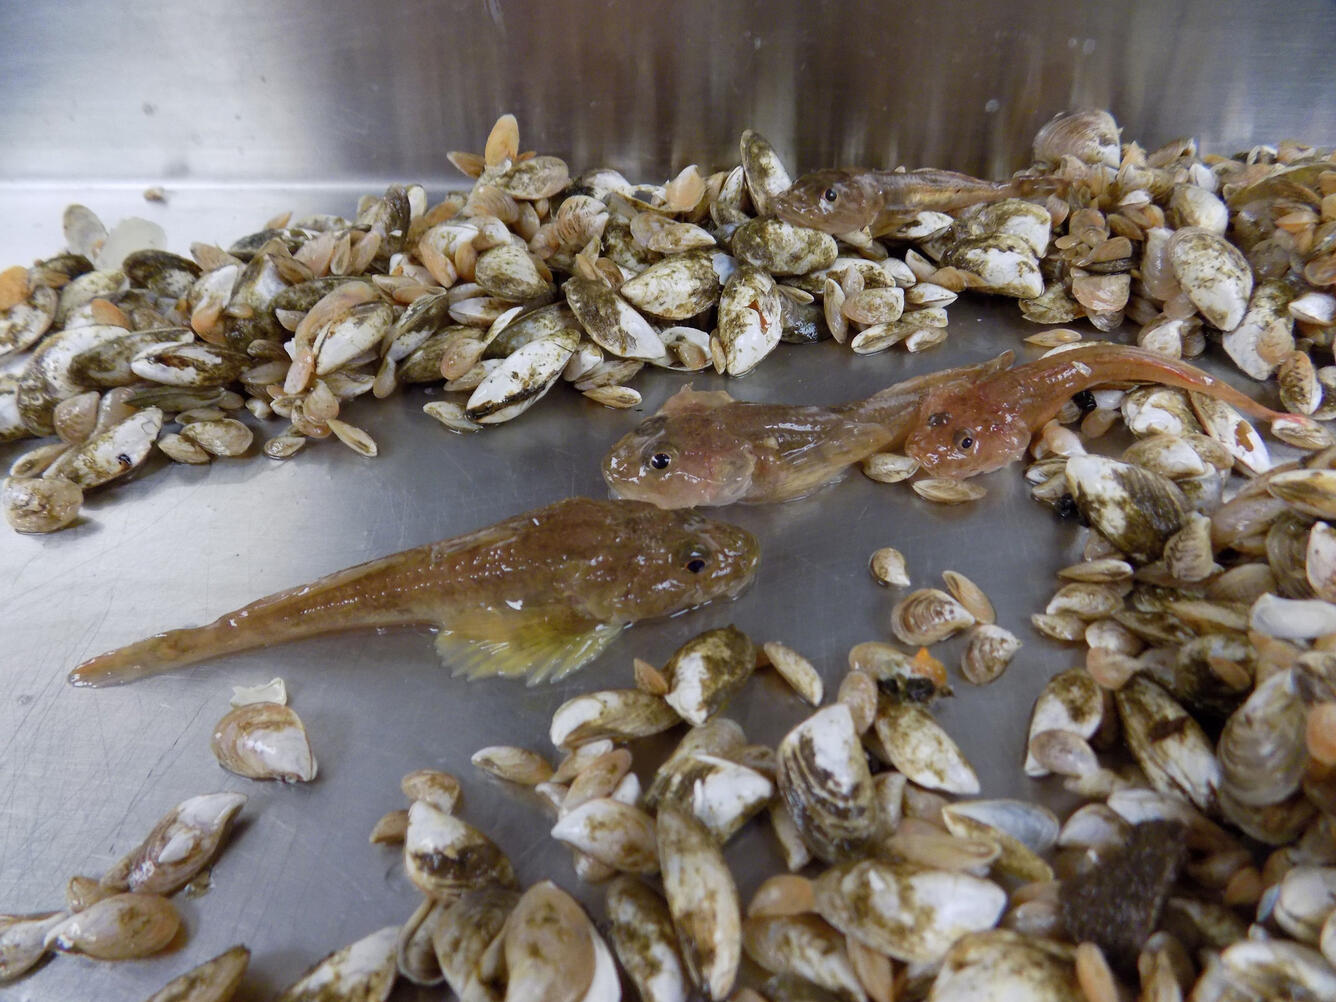 Quagga mussels and deepwater sculpin collected from a benthic trawl near Grand Haven, Michigan by the USGS R/V Sturgeon